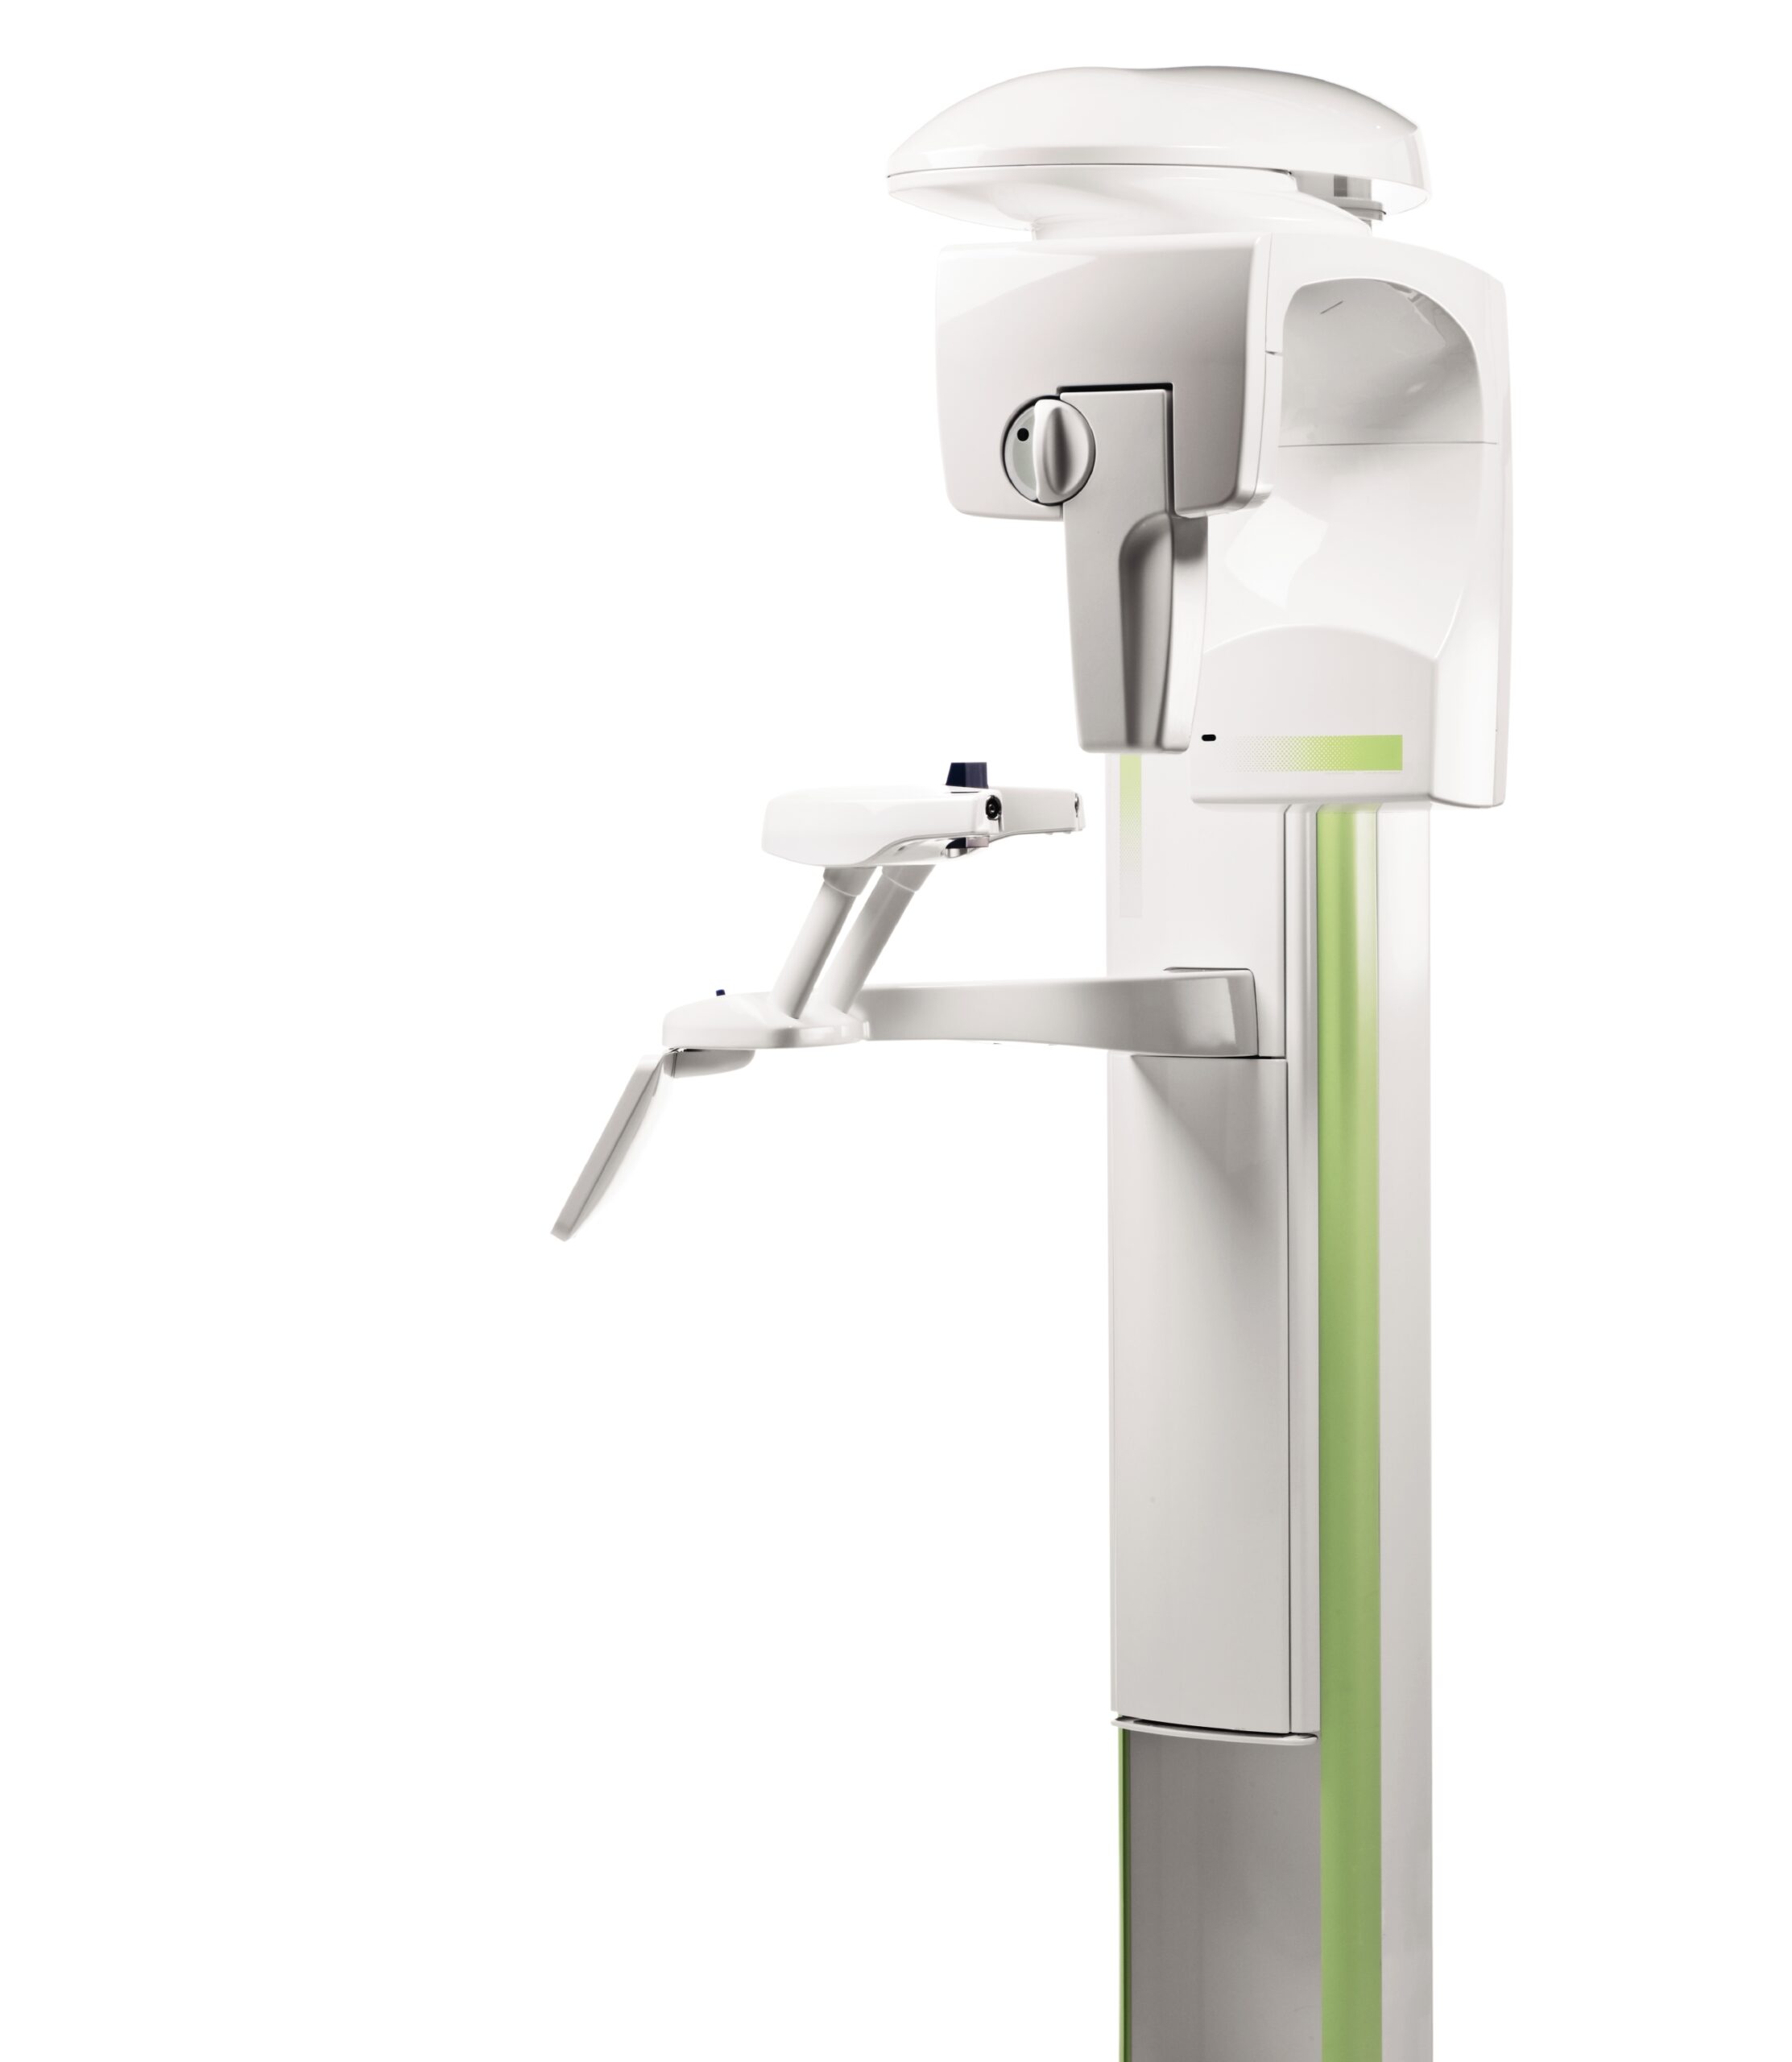 The Planmeca ProMax is digital 2D Imaging System